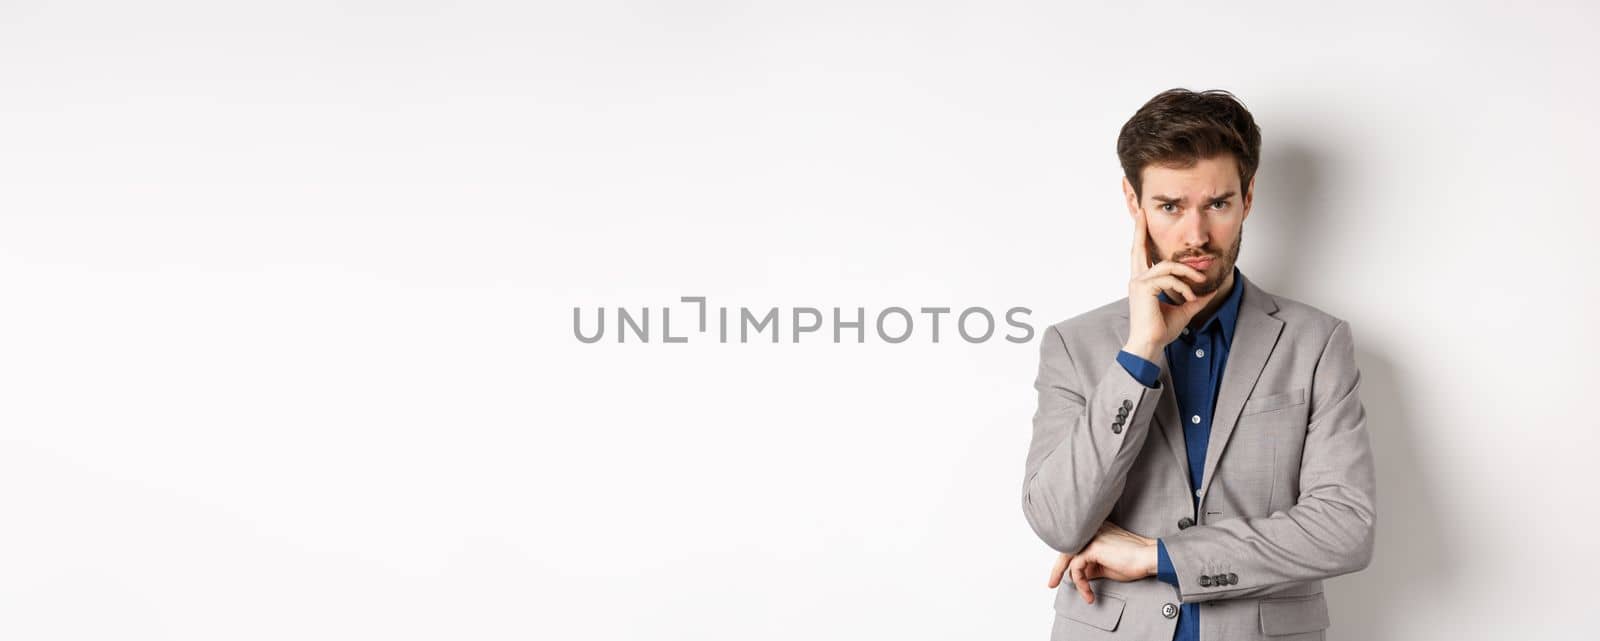 Troubled frowning business man in suit looking at camera pensive, thinking or making decision, standing on white background.